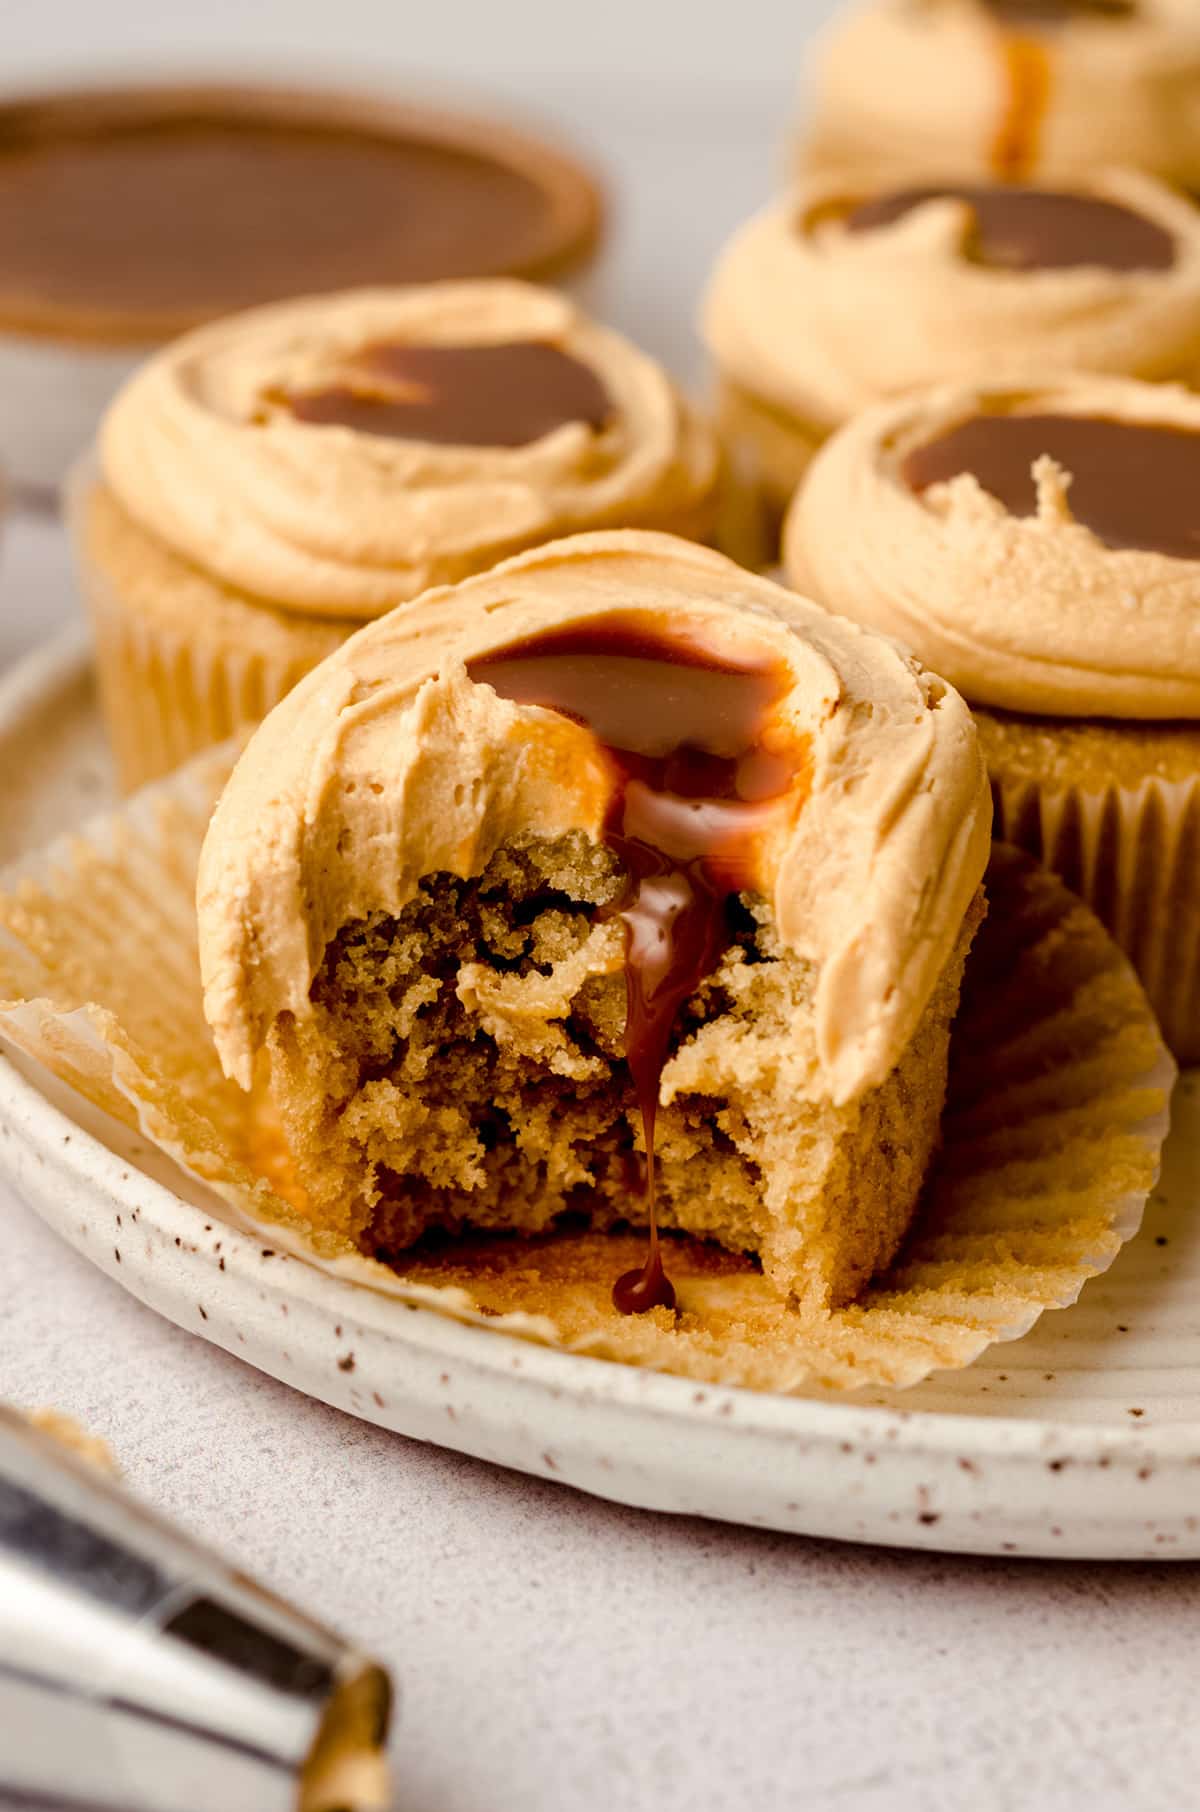 Several dulce de leche cupcakes on a plate, with one with a bite taken out of it.